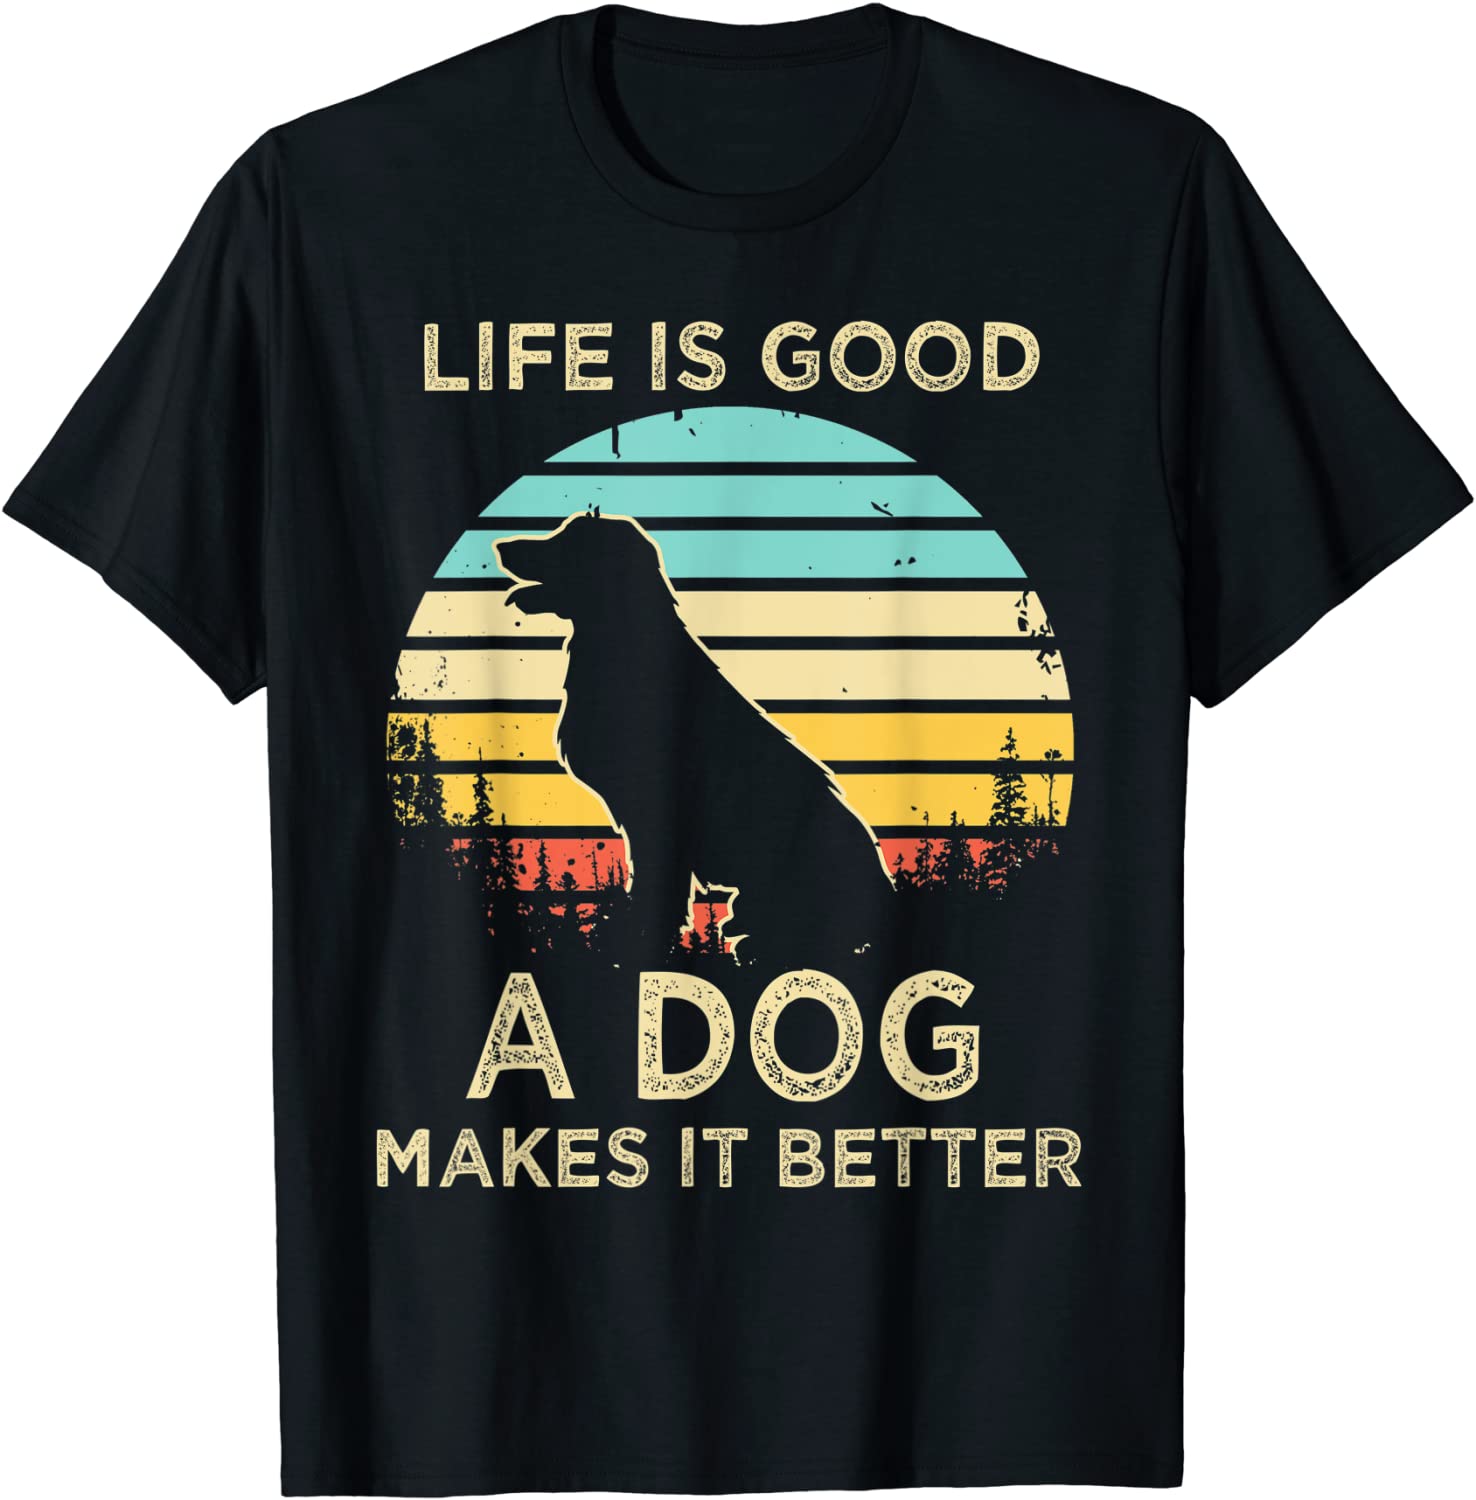 Amazon.com: Vintage Life Is Good A Dog Makes It Better ...